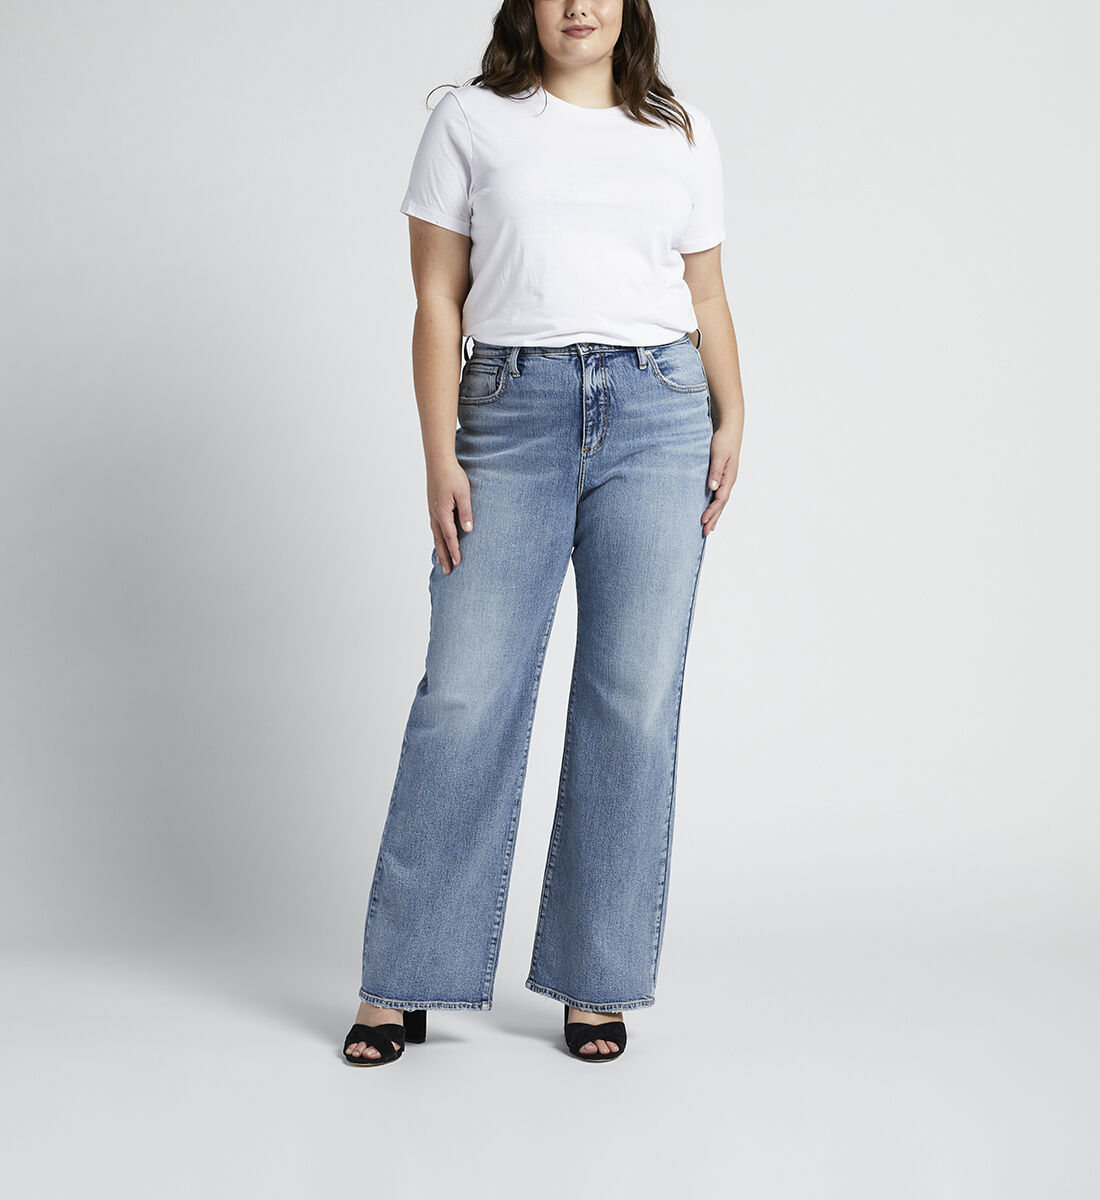 Highly Desirable High Rise Trouser Leg Jeans Plus Size Front